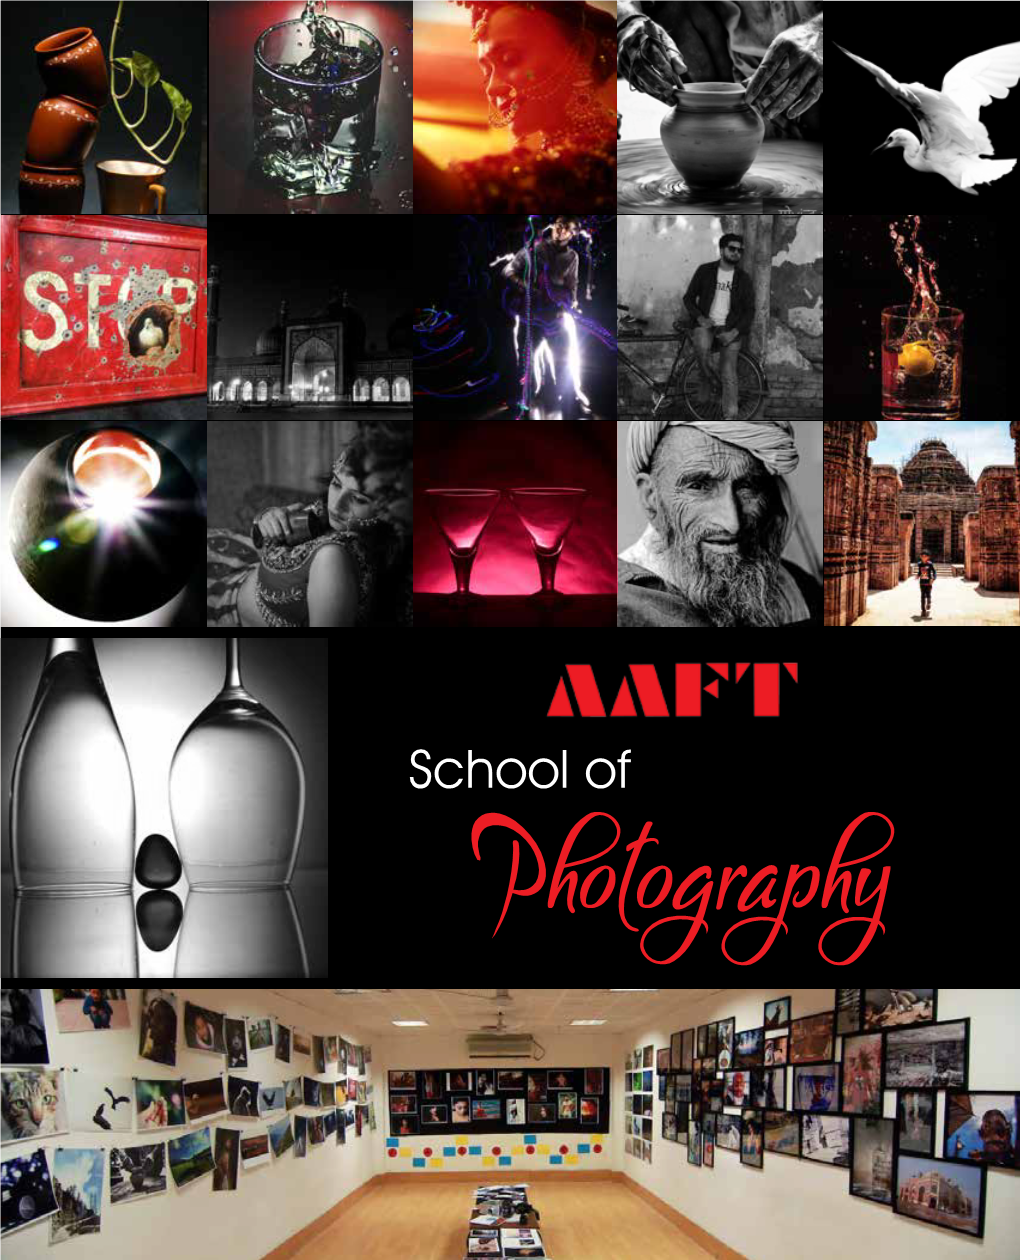 School of Photography Is a Place Where Your Most Desired Goal Can Be Reached